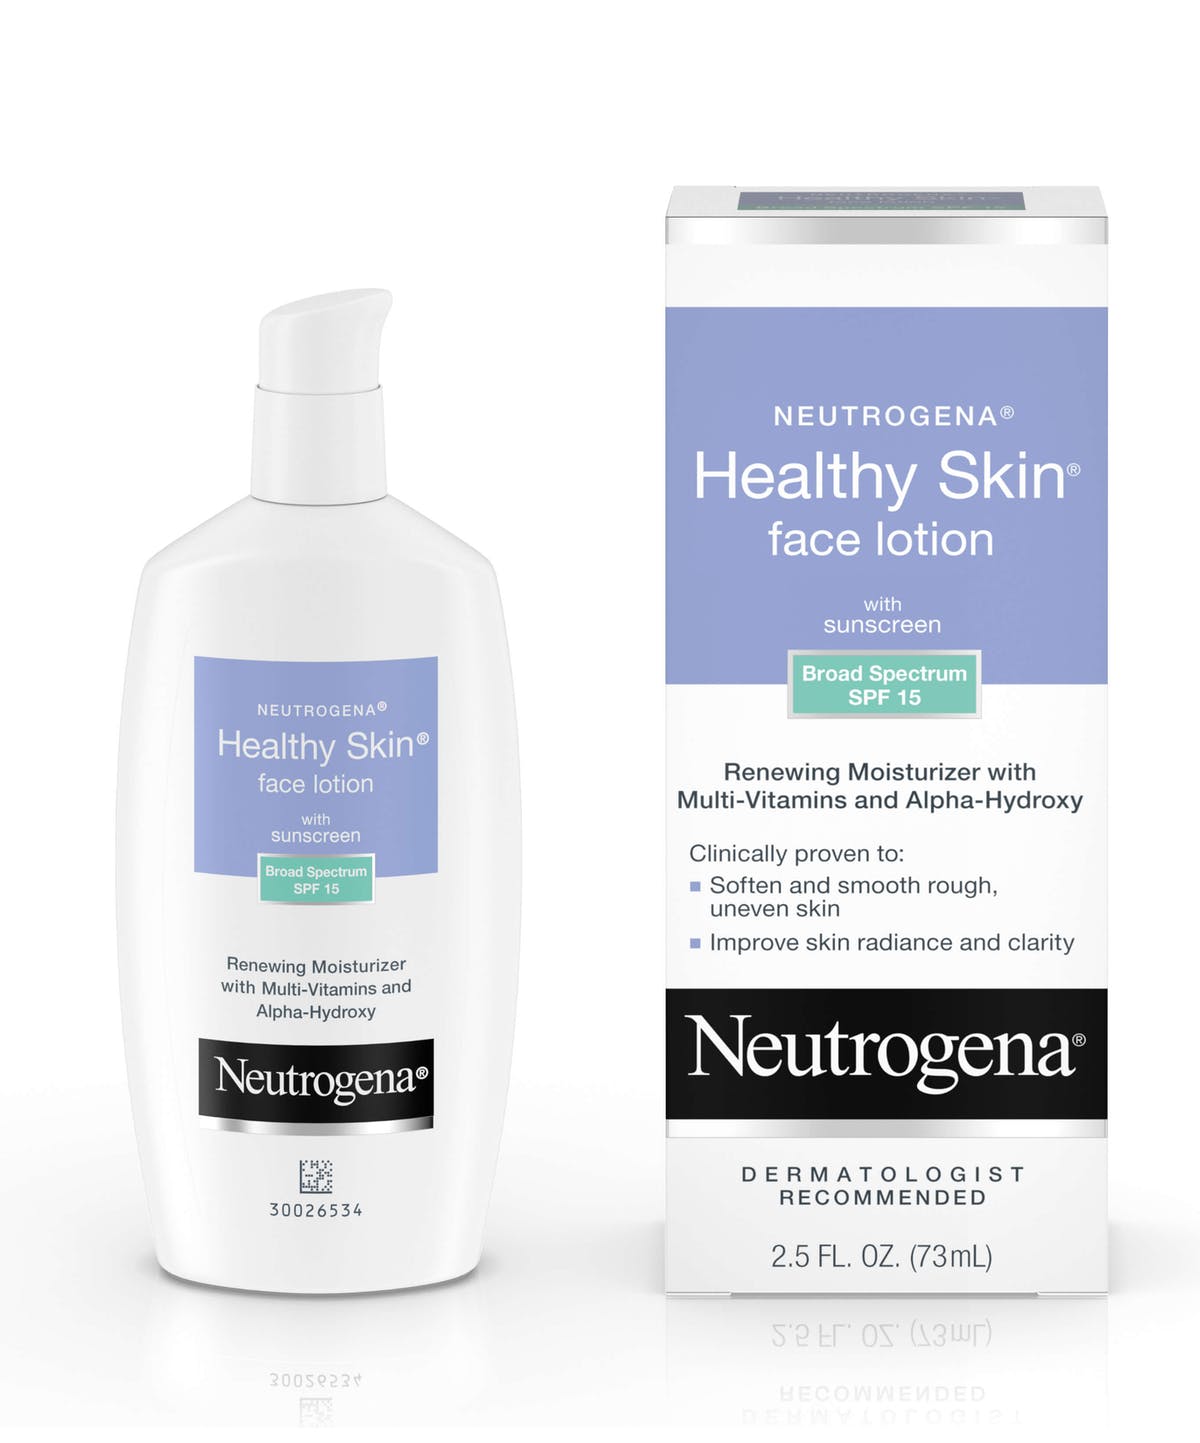 NEUTROGENA HEALTHY SKIN FACE LOTION WITH SUNSCREEN SPF 15